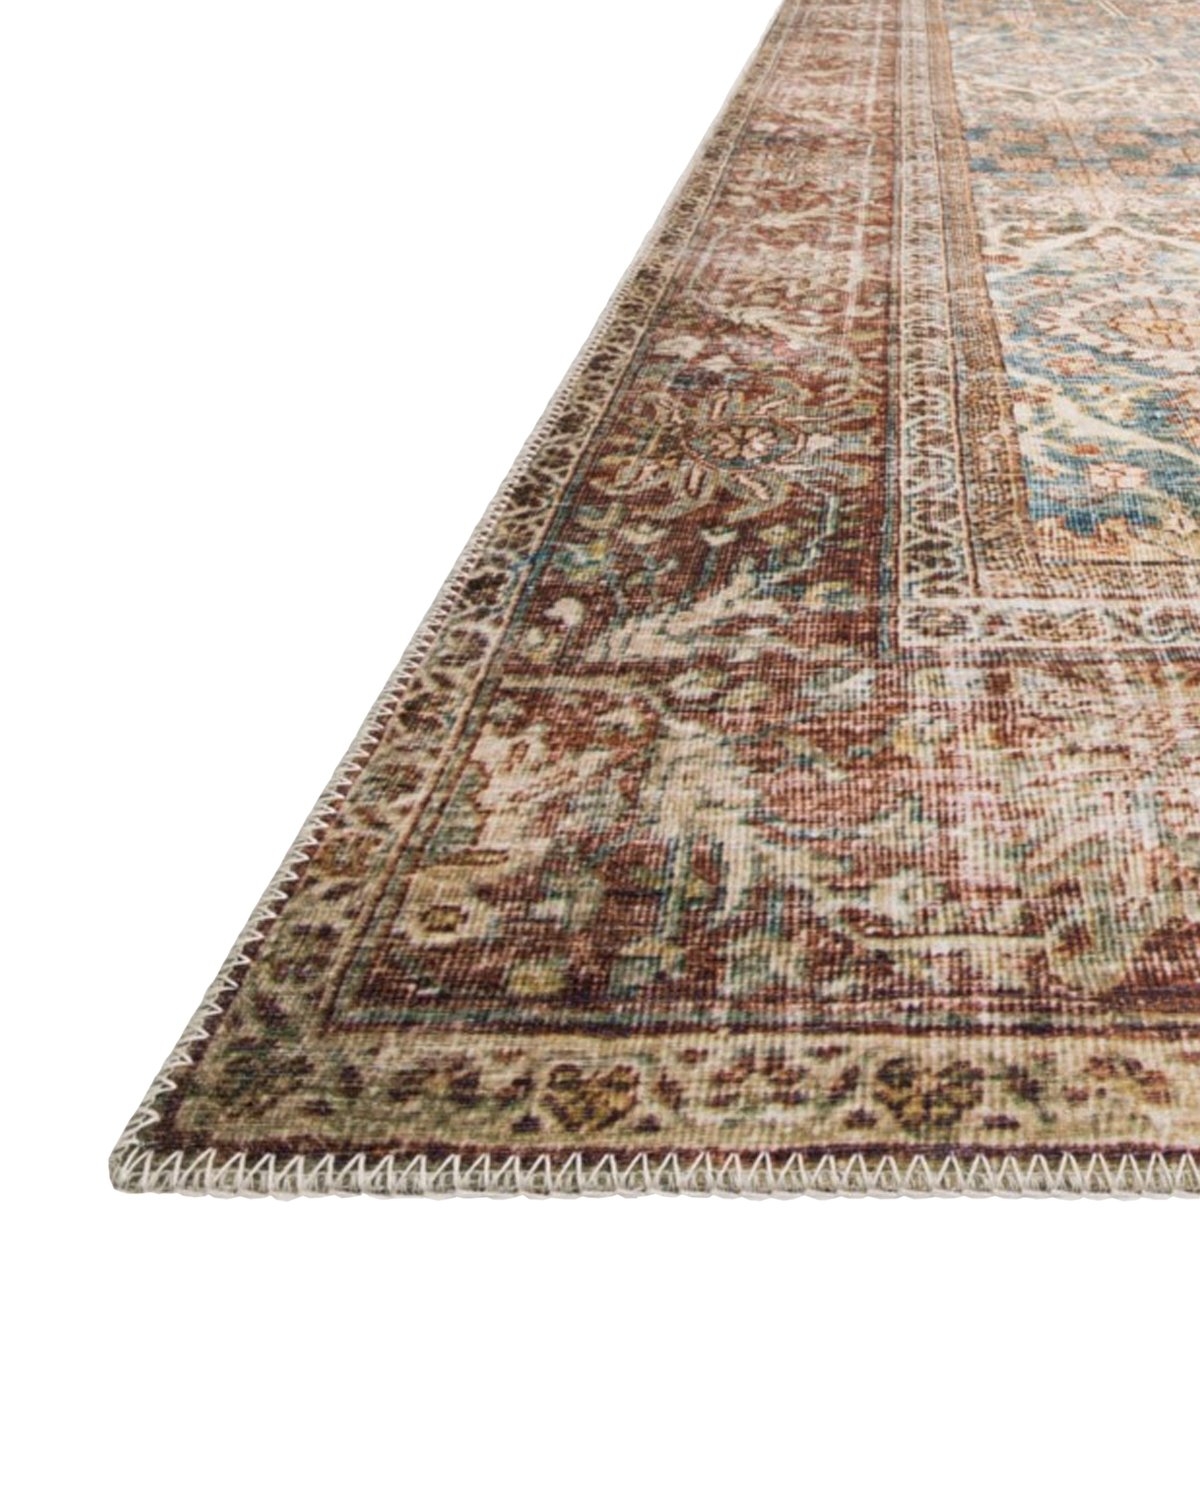 TUNIS PATTERNED RUG, 2'6" x 9'6" - Image 2